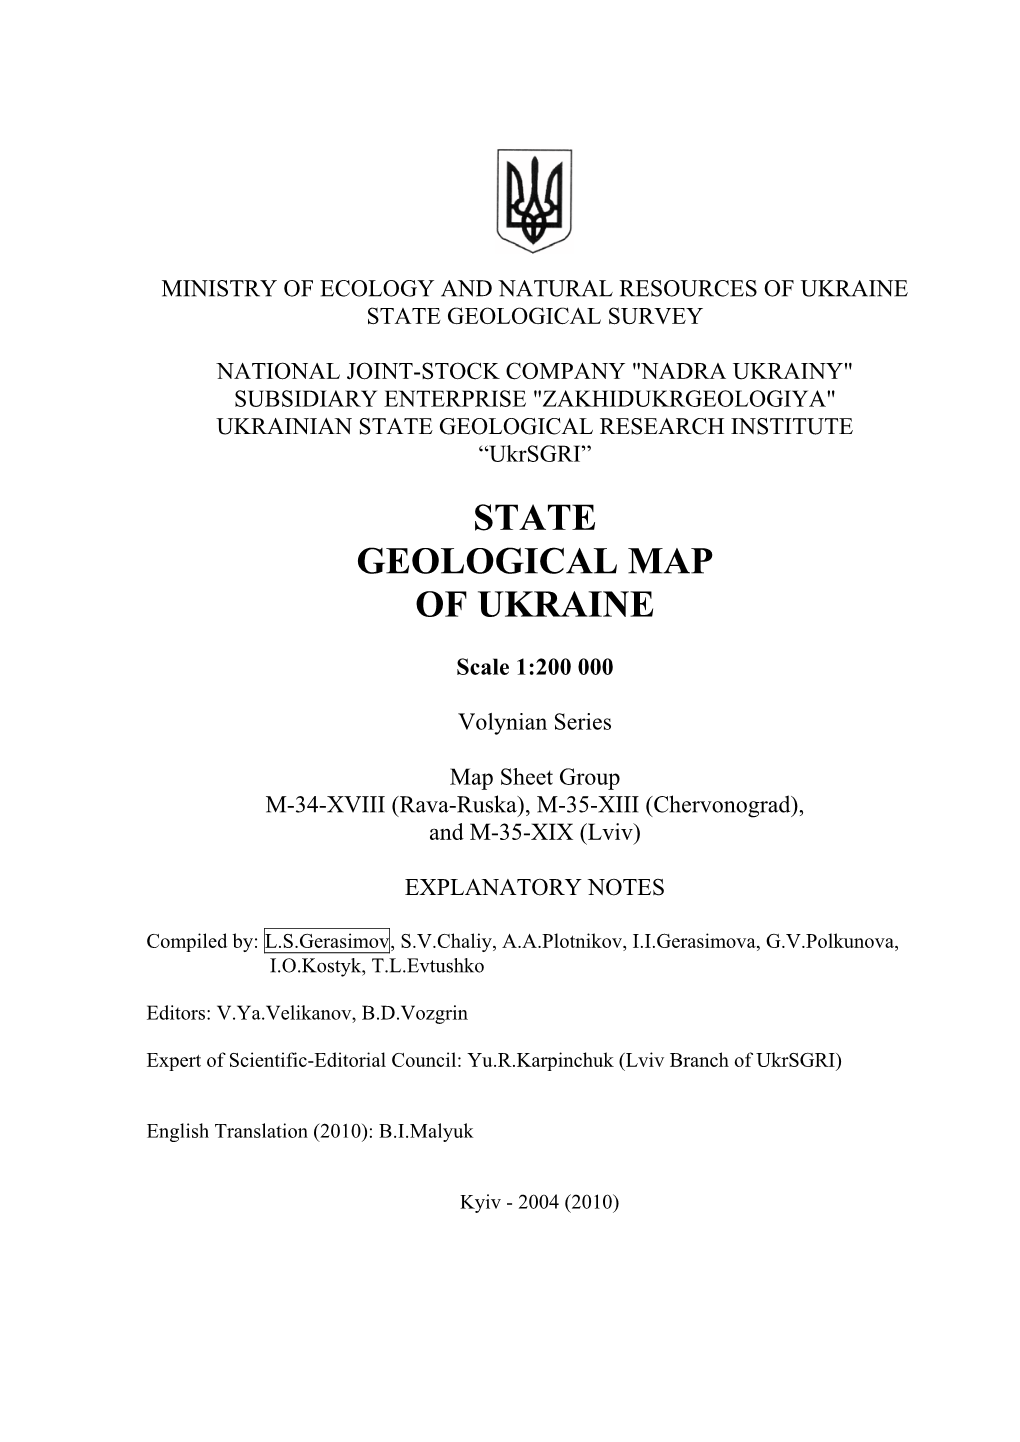 State Geological Map of Ukraine